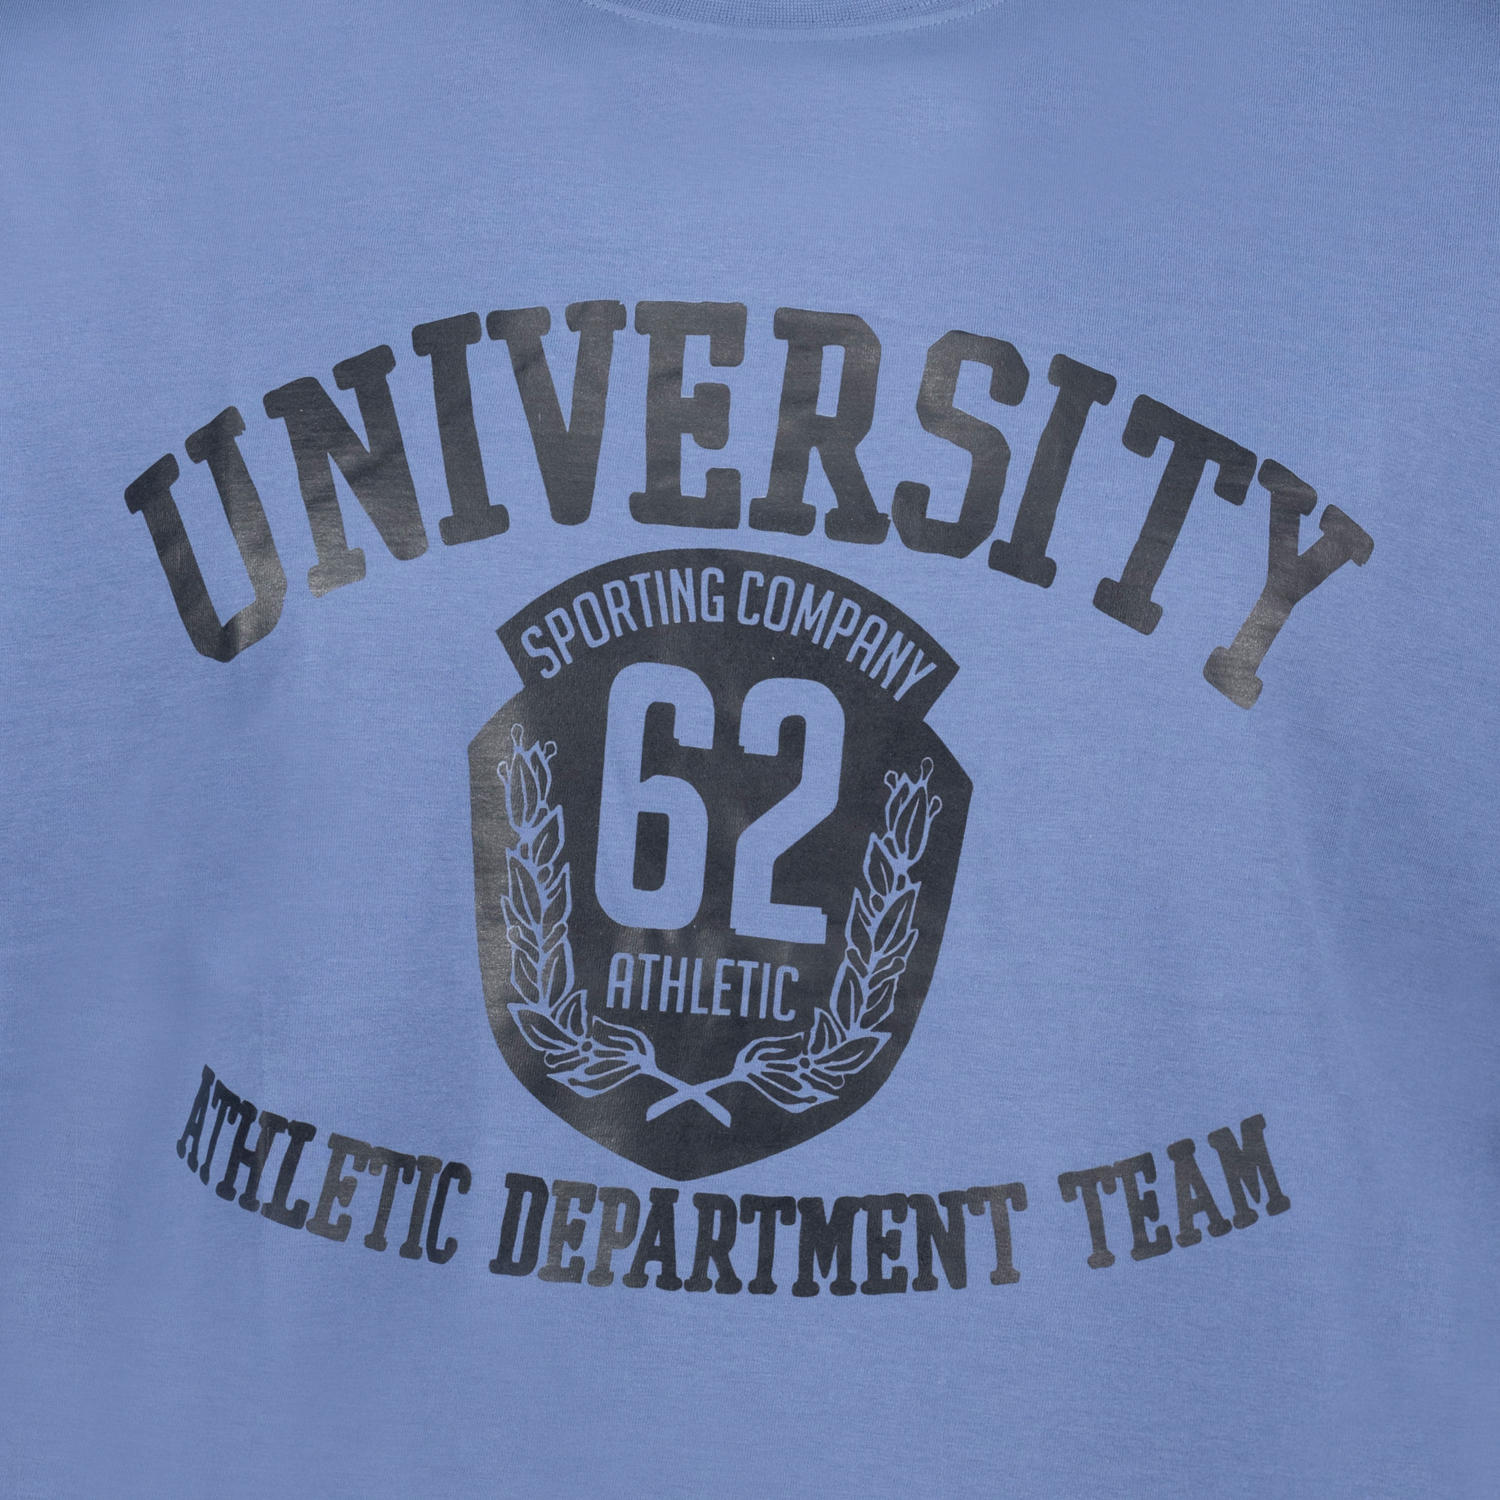 T-shirt series University by Adamo in light blue with imprint up to oversize 10XL